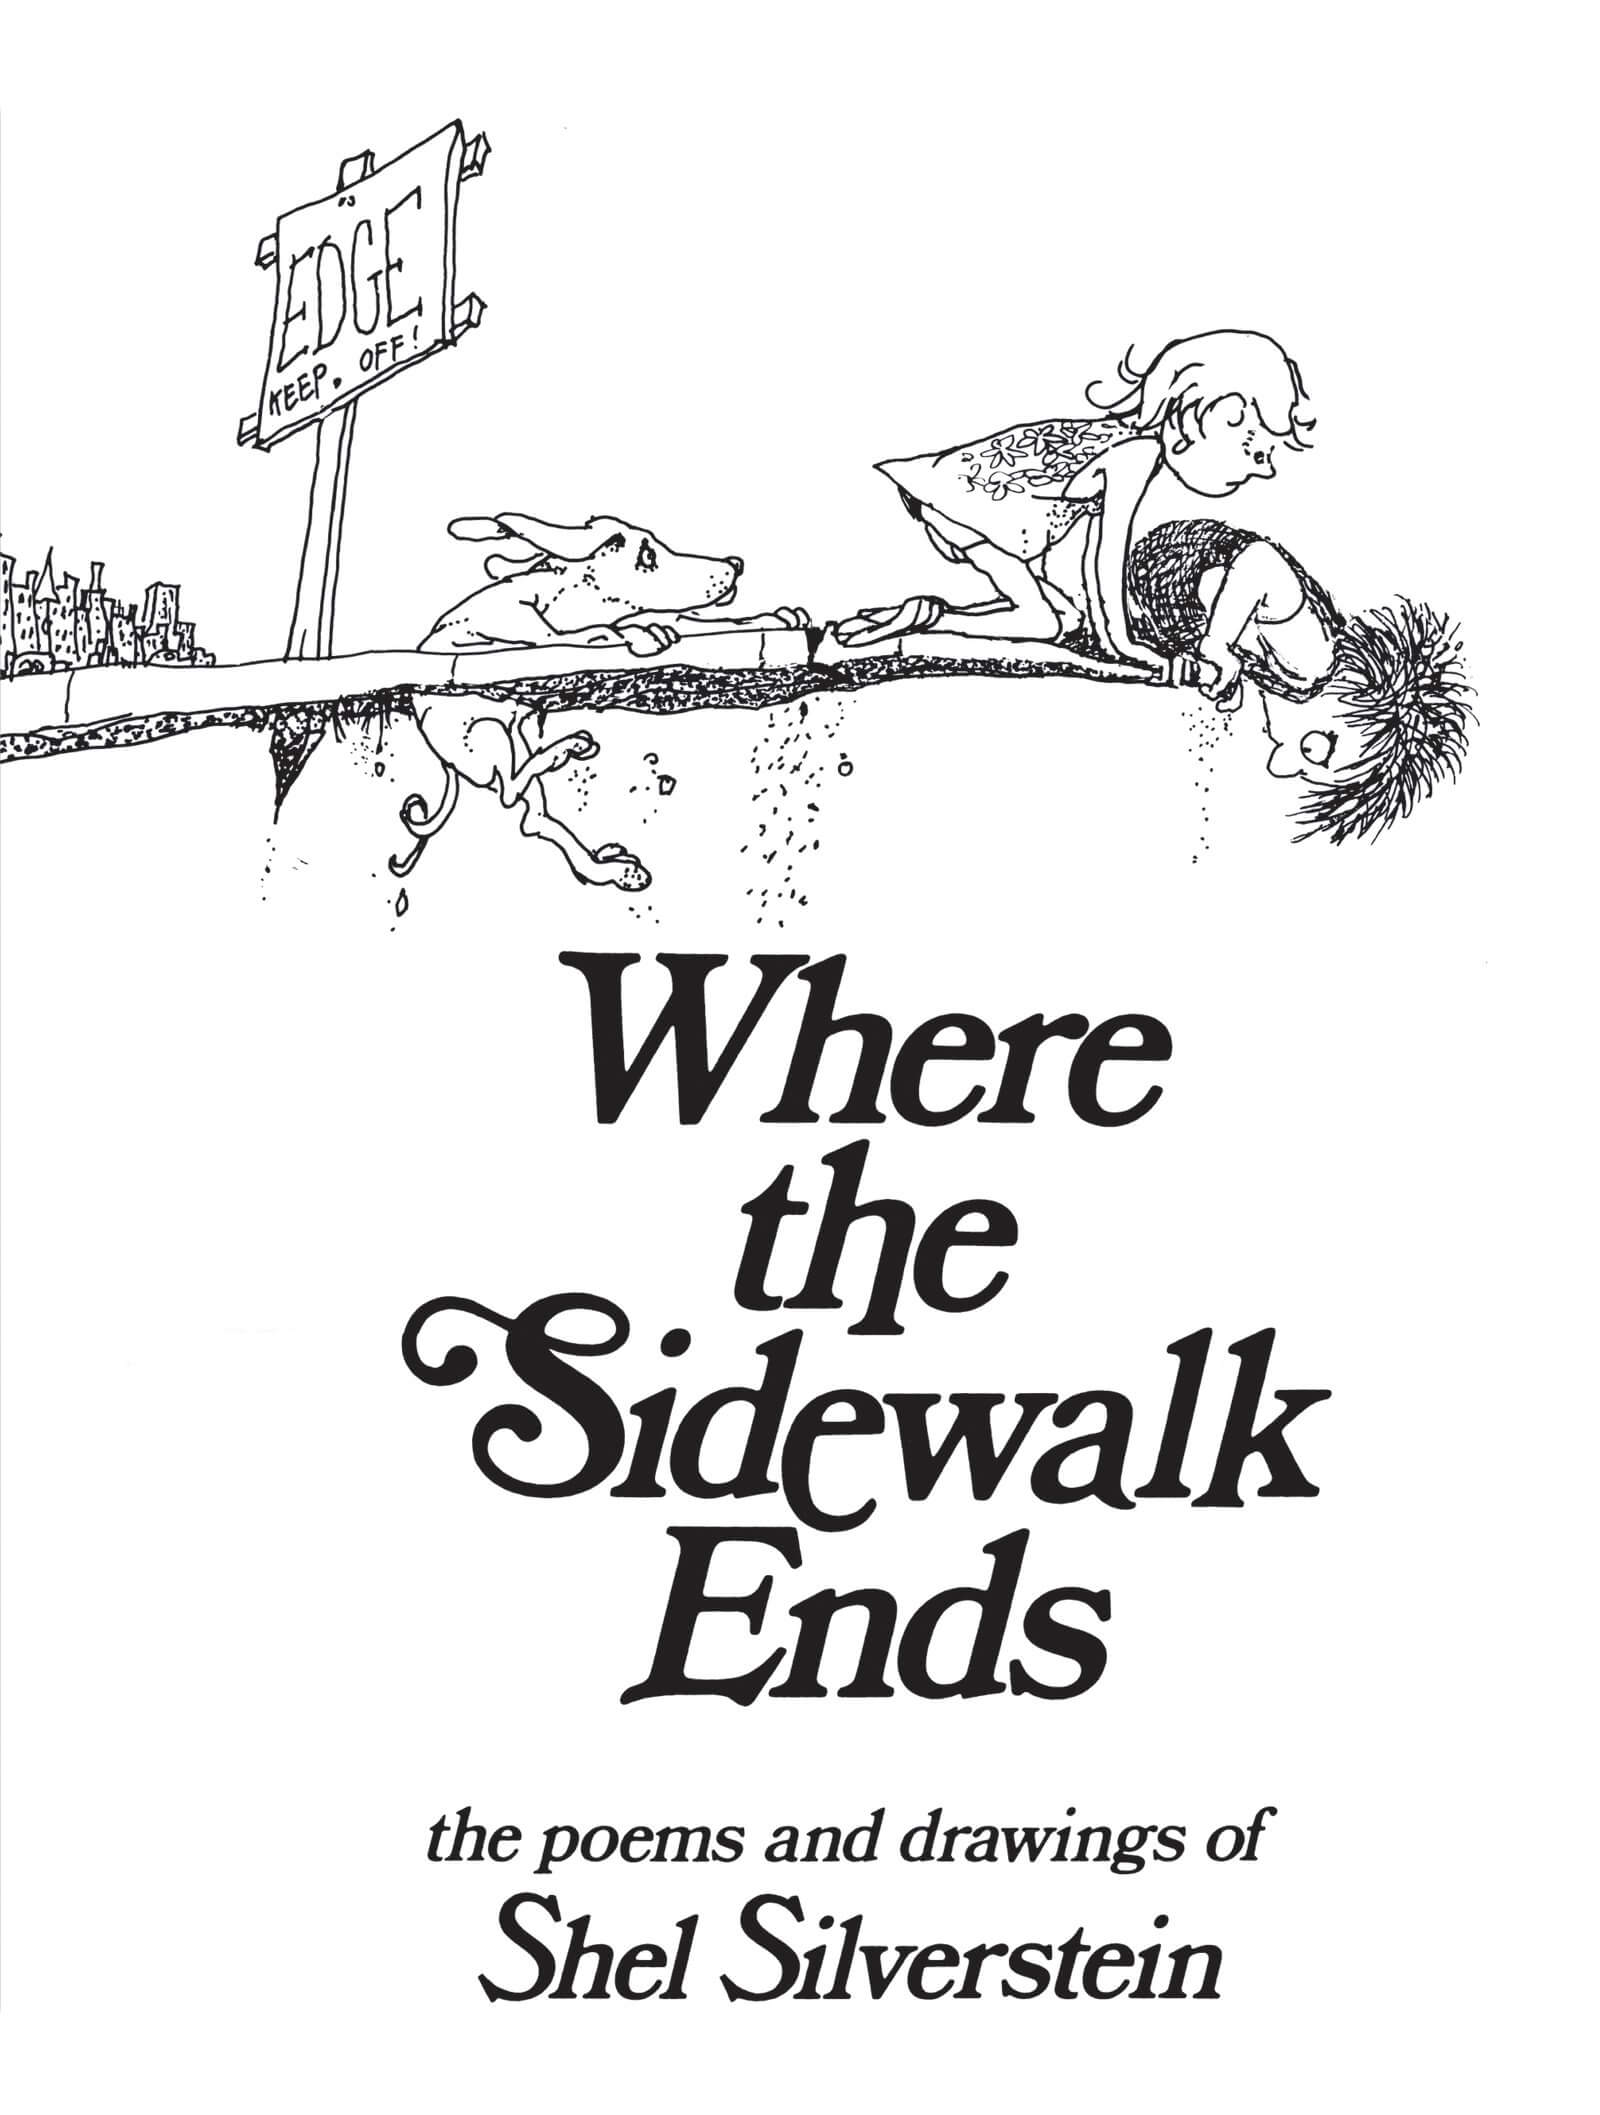 Cover of Where the Sidewalk Ends by Shel Silverstein